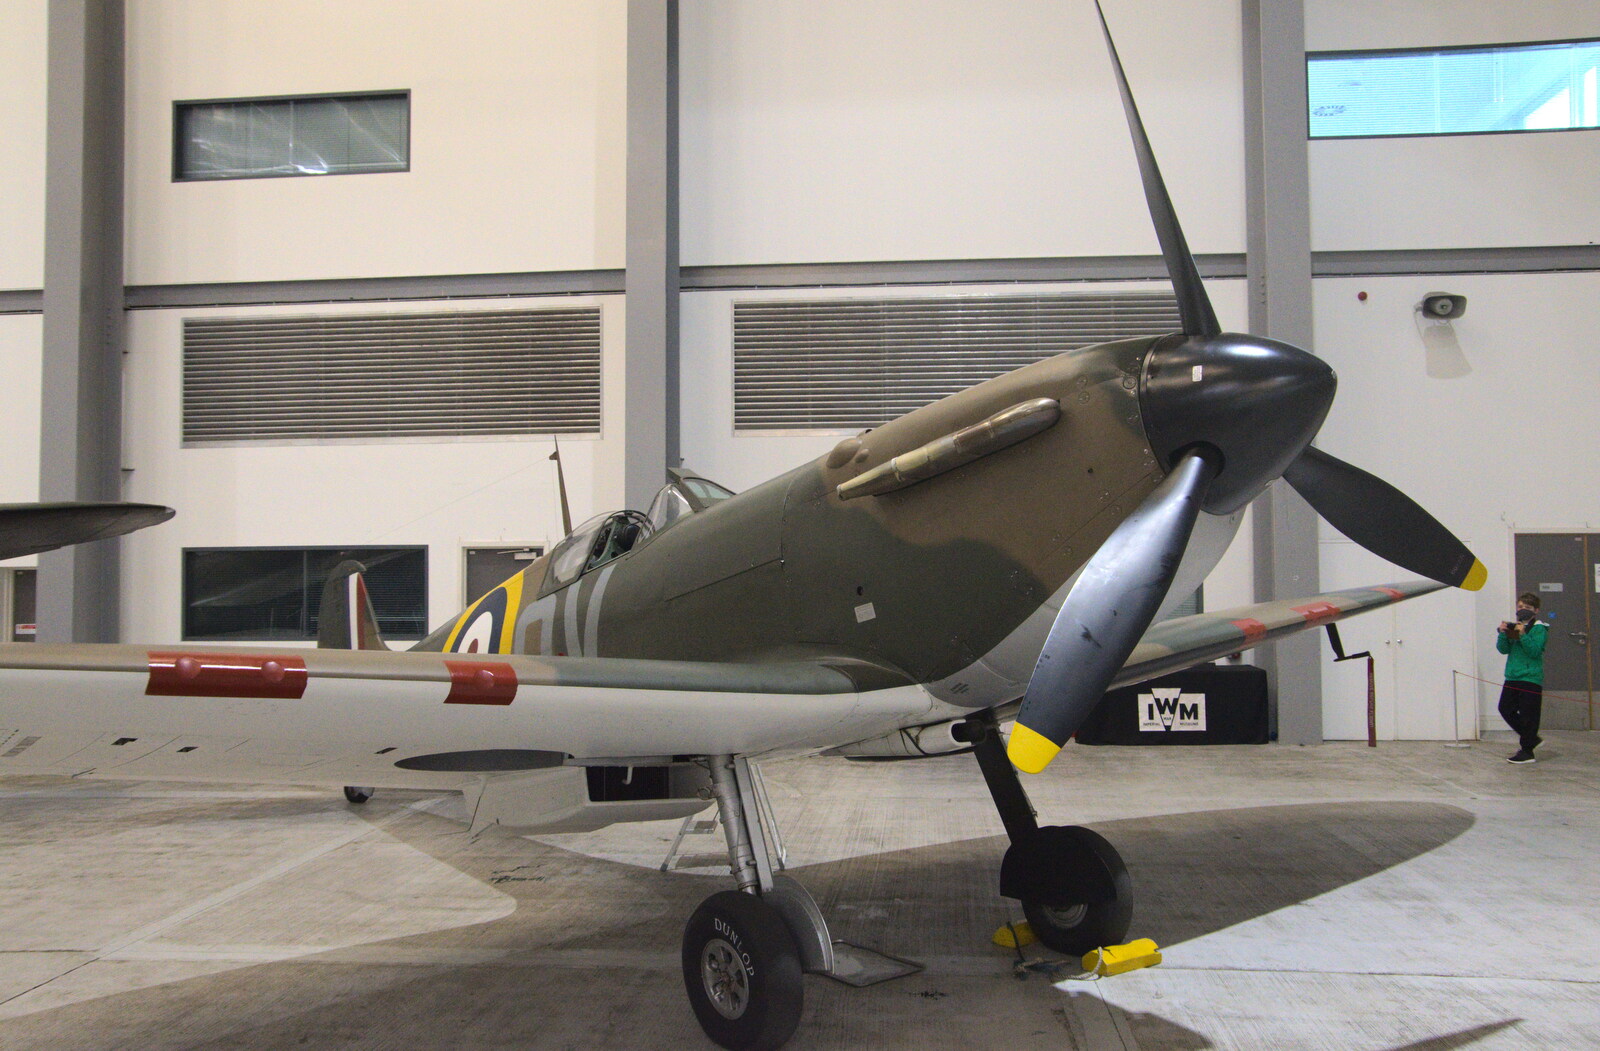 Fred looks at a Mark II Spitfire from The Duxford Dash, IWM Duxford, Cambridge - 13th September 2020